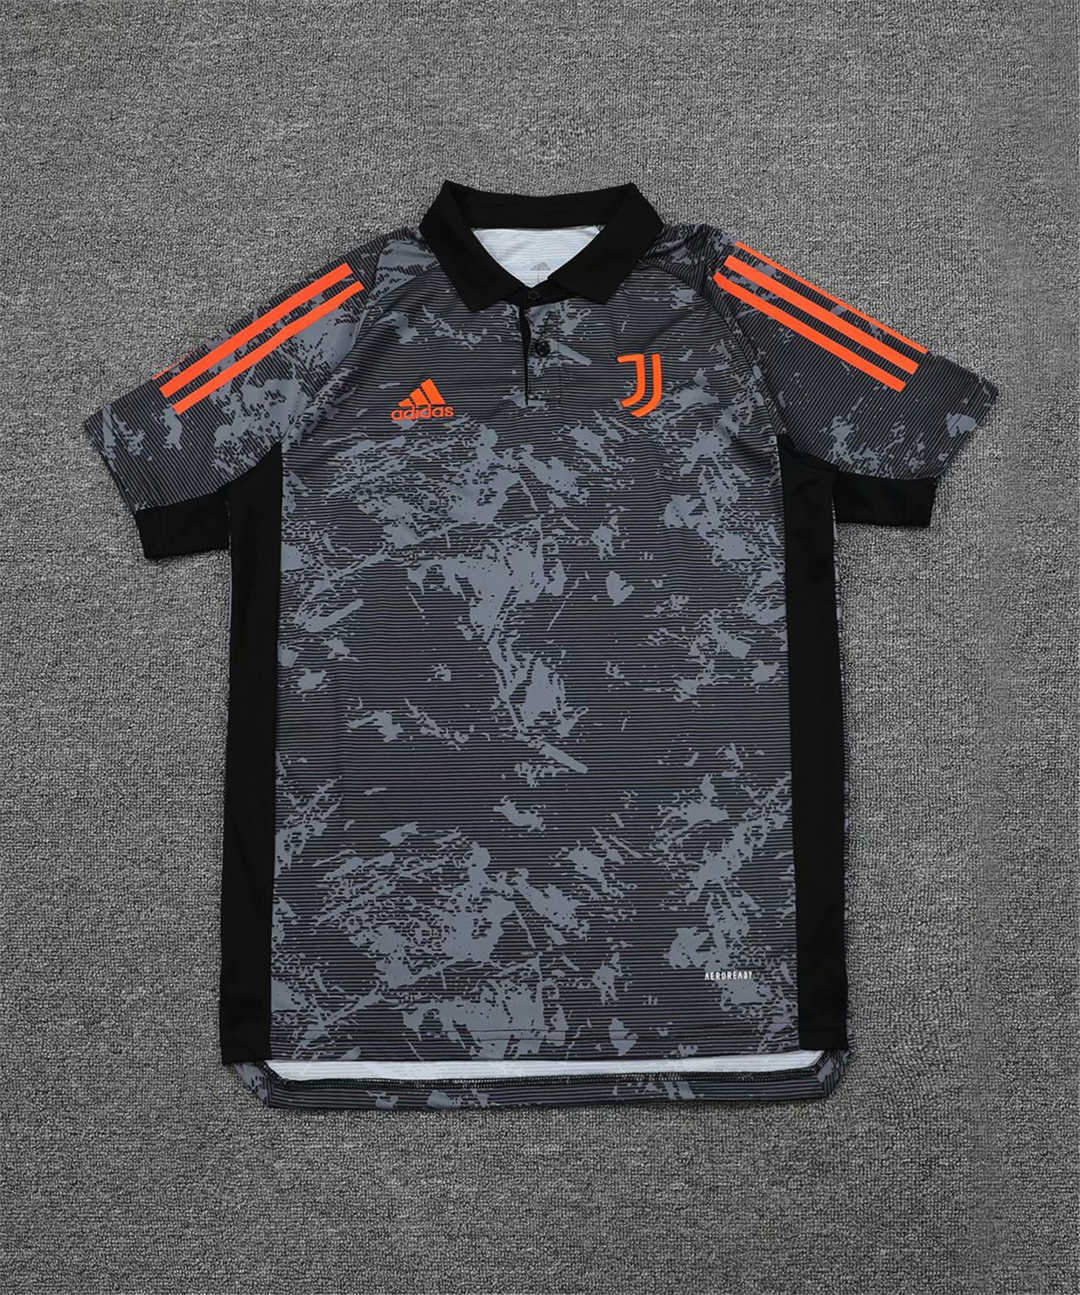 2020/21 Juventus UCL Black Texture Mens Soccer Polo Jersey